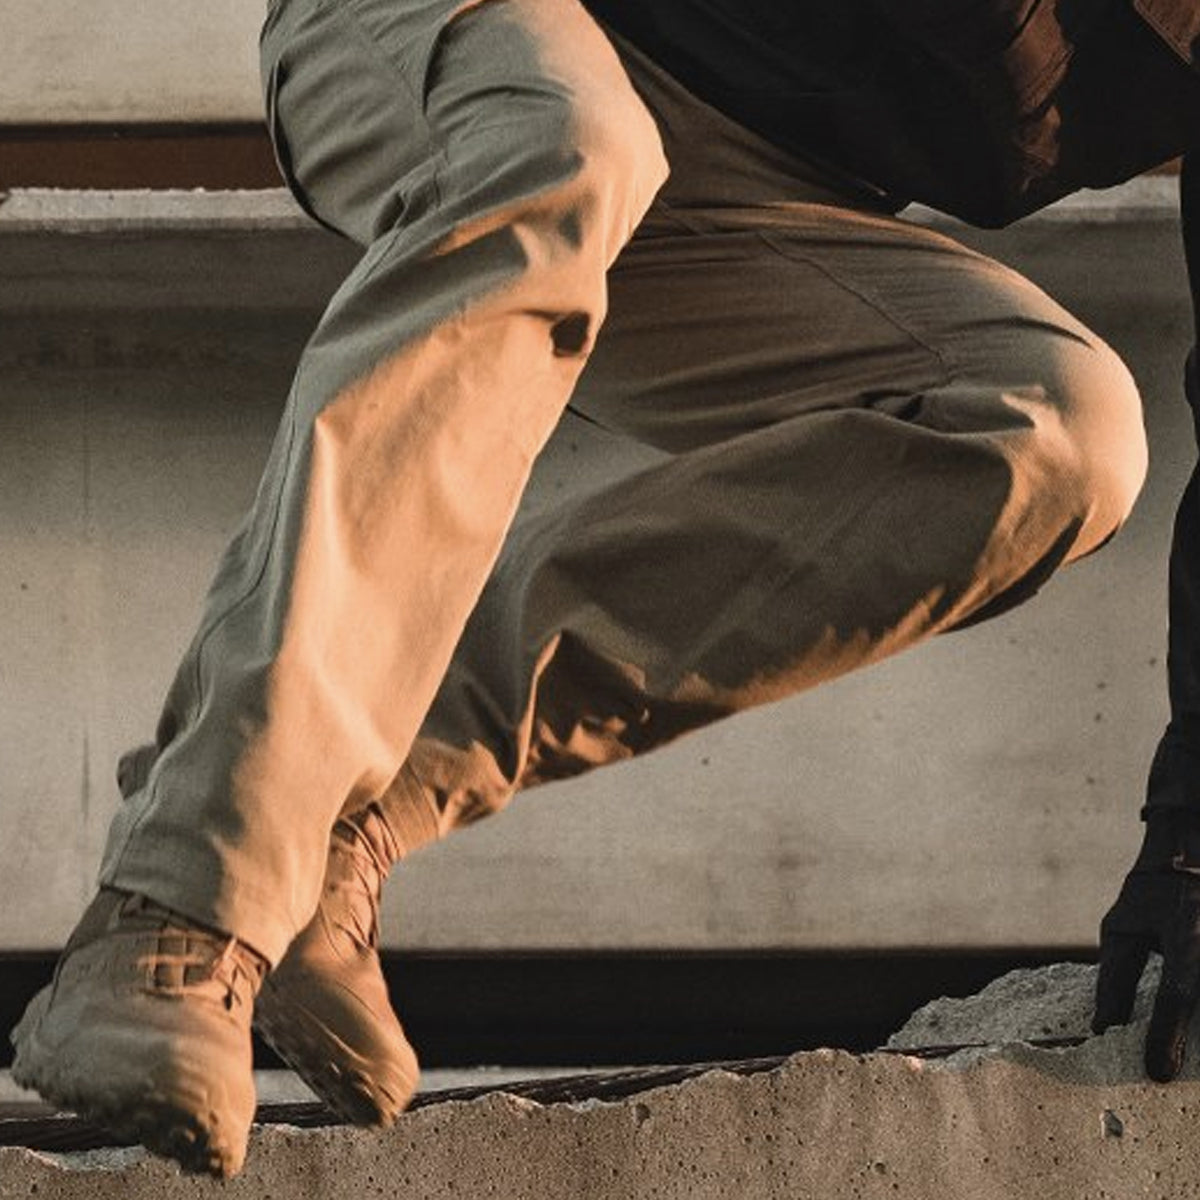 Why You Need These Hiking/Outdoor Pants